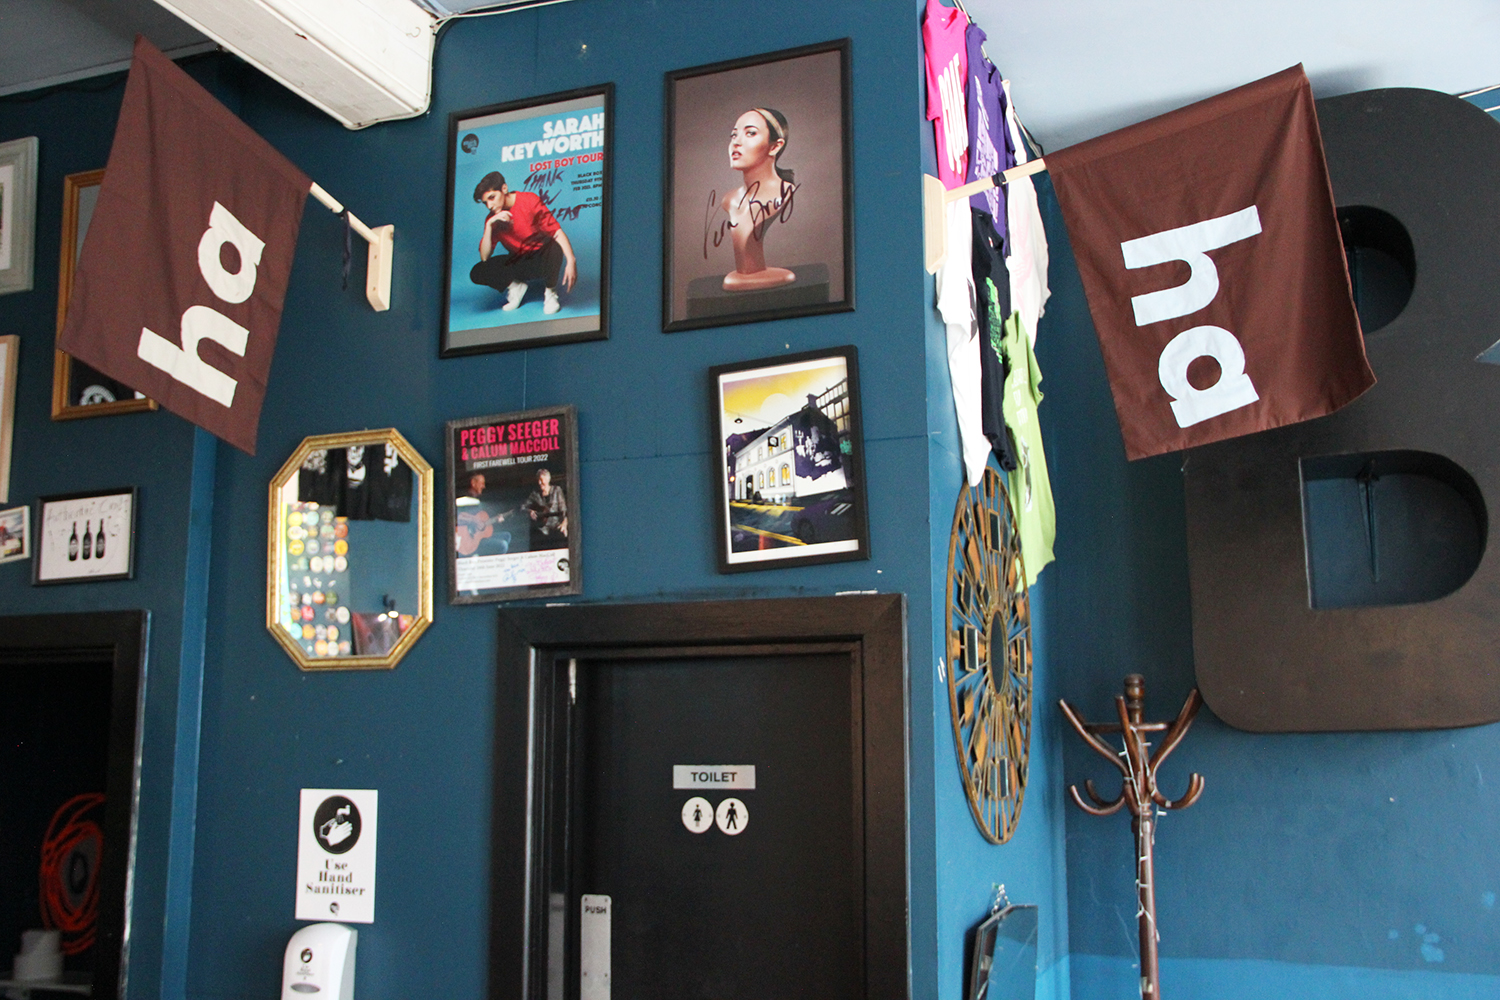 image showing two 'ha ha' flags mounted on the wall in the Green Room bar above the toilet doors.